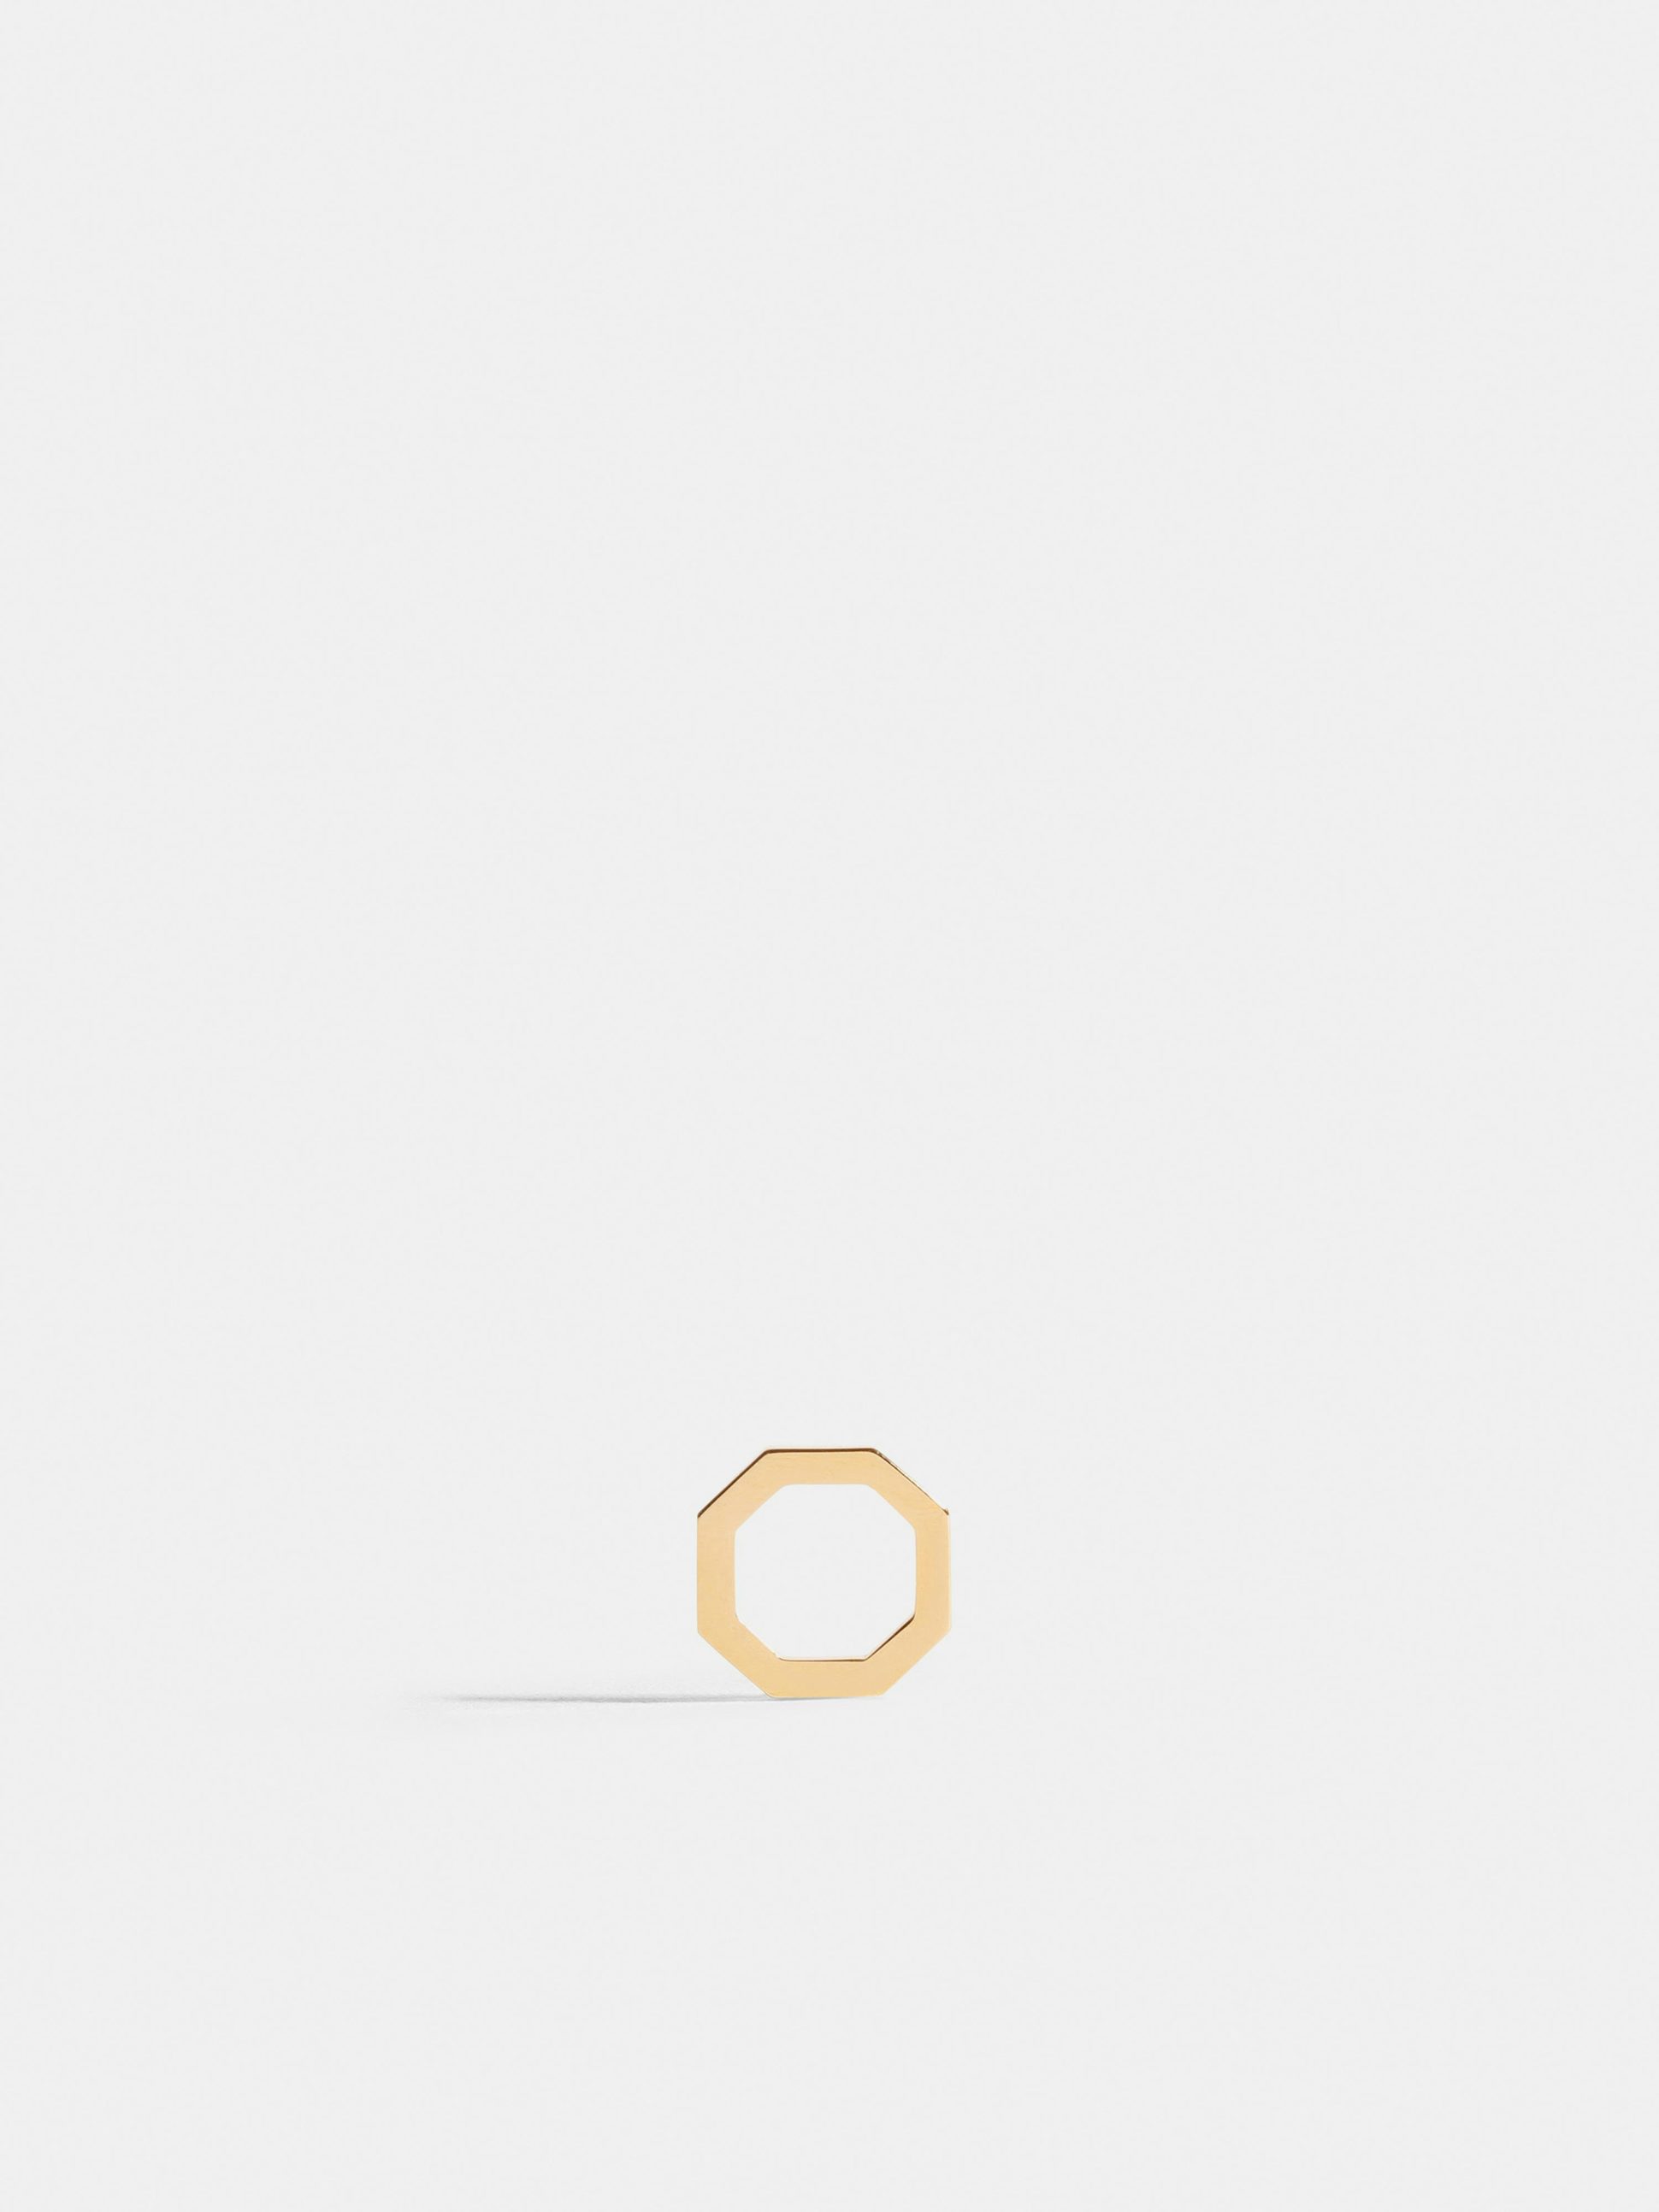 Octogone motif in 18k Fairmined ethical yellow gold, on a pearl grey cord. 